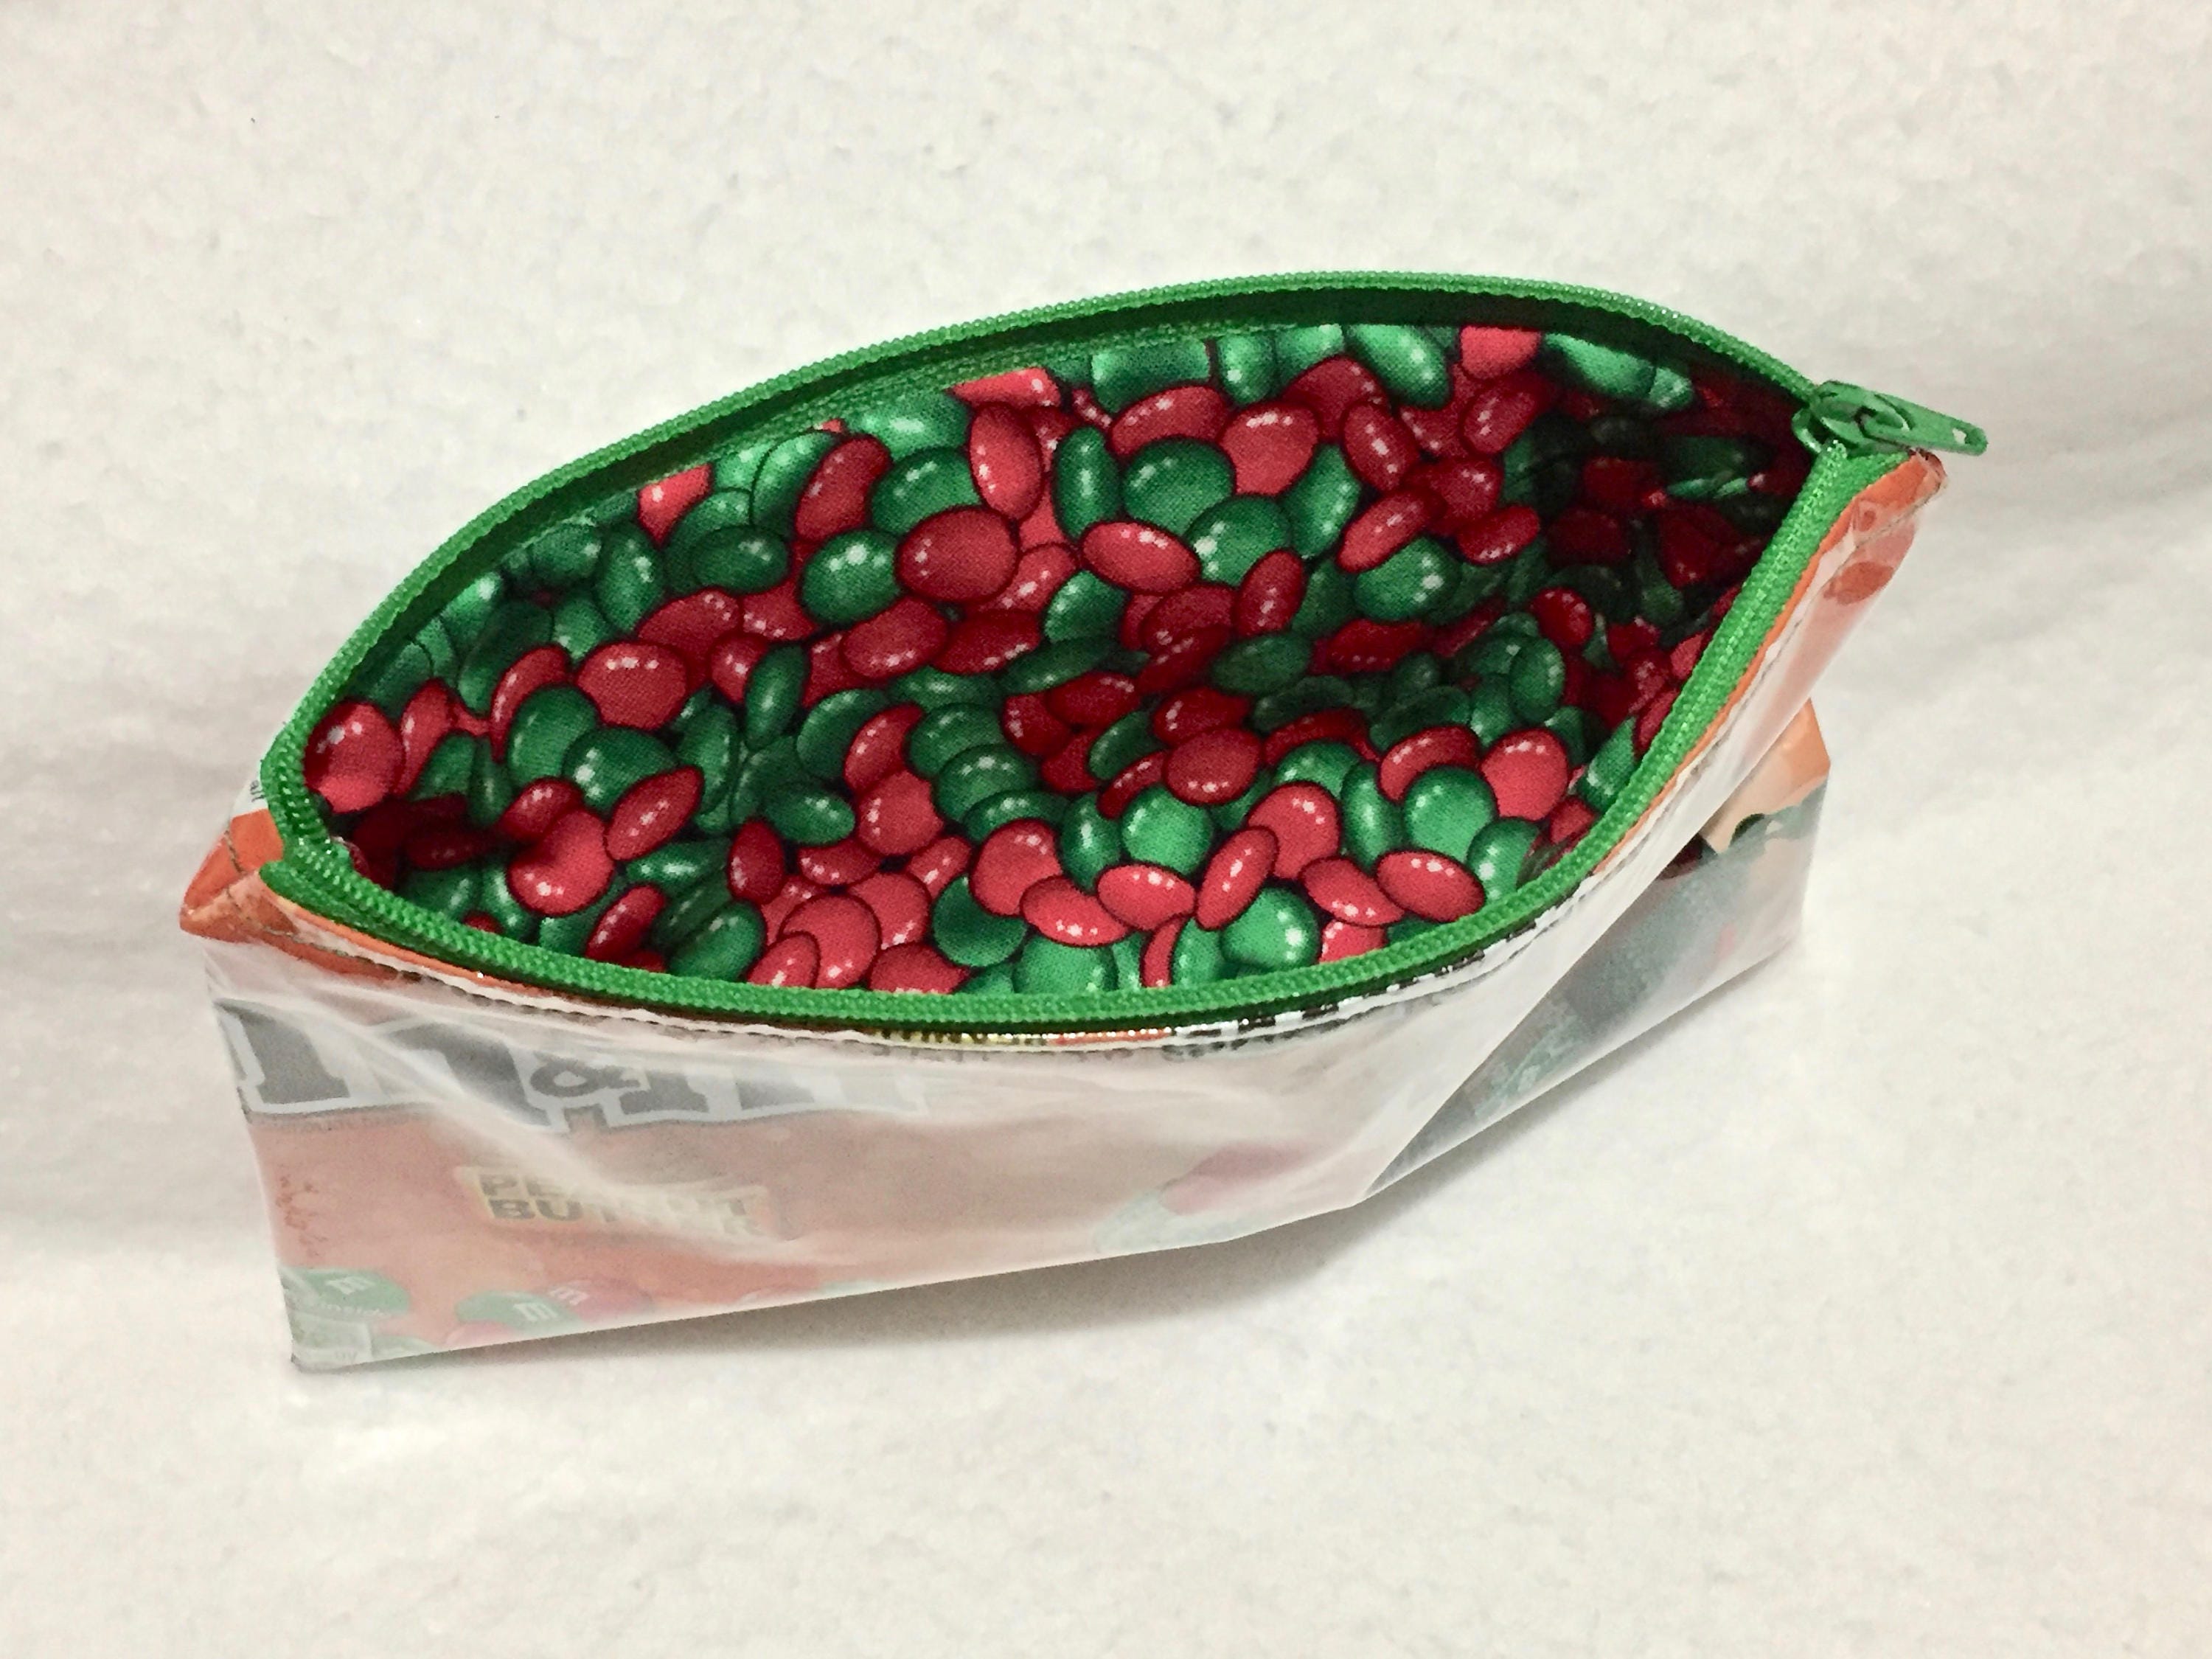 NEW 2021 Design M&ms Christmas Peanut Butter Candy Wrapper -  Sweden